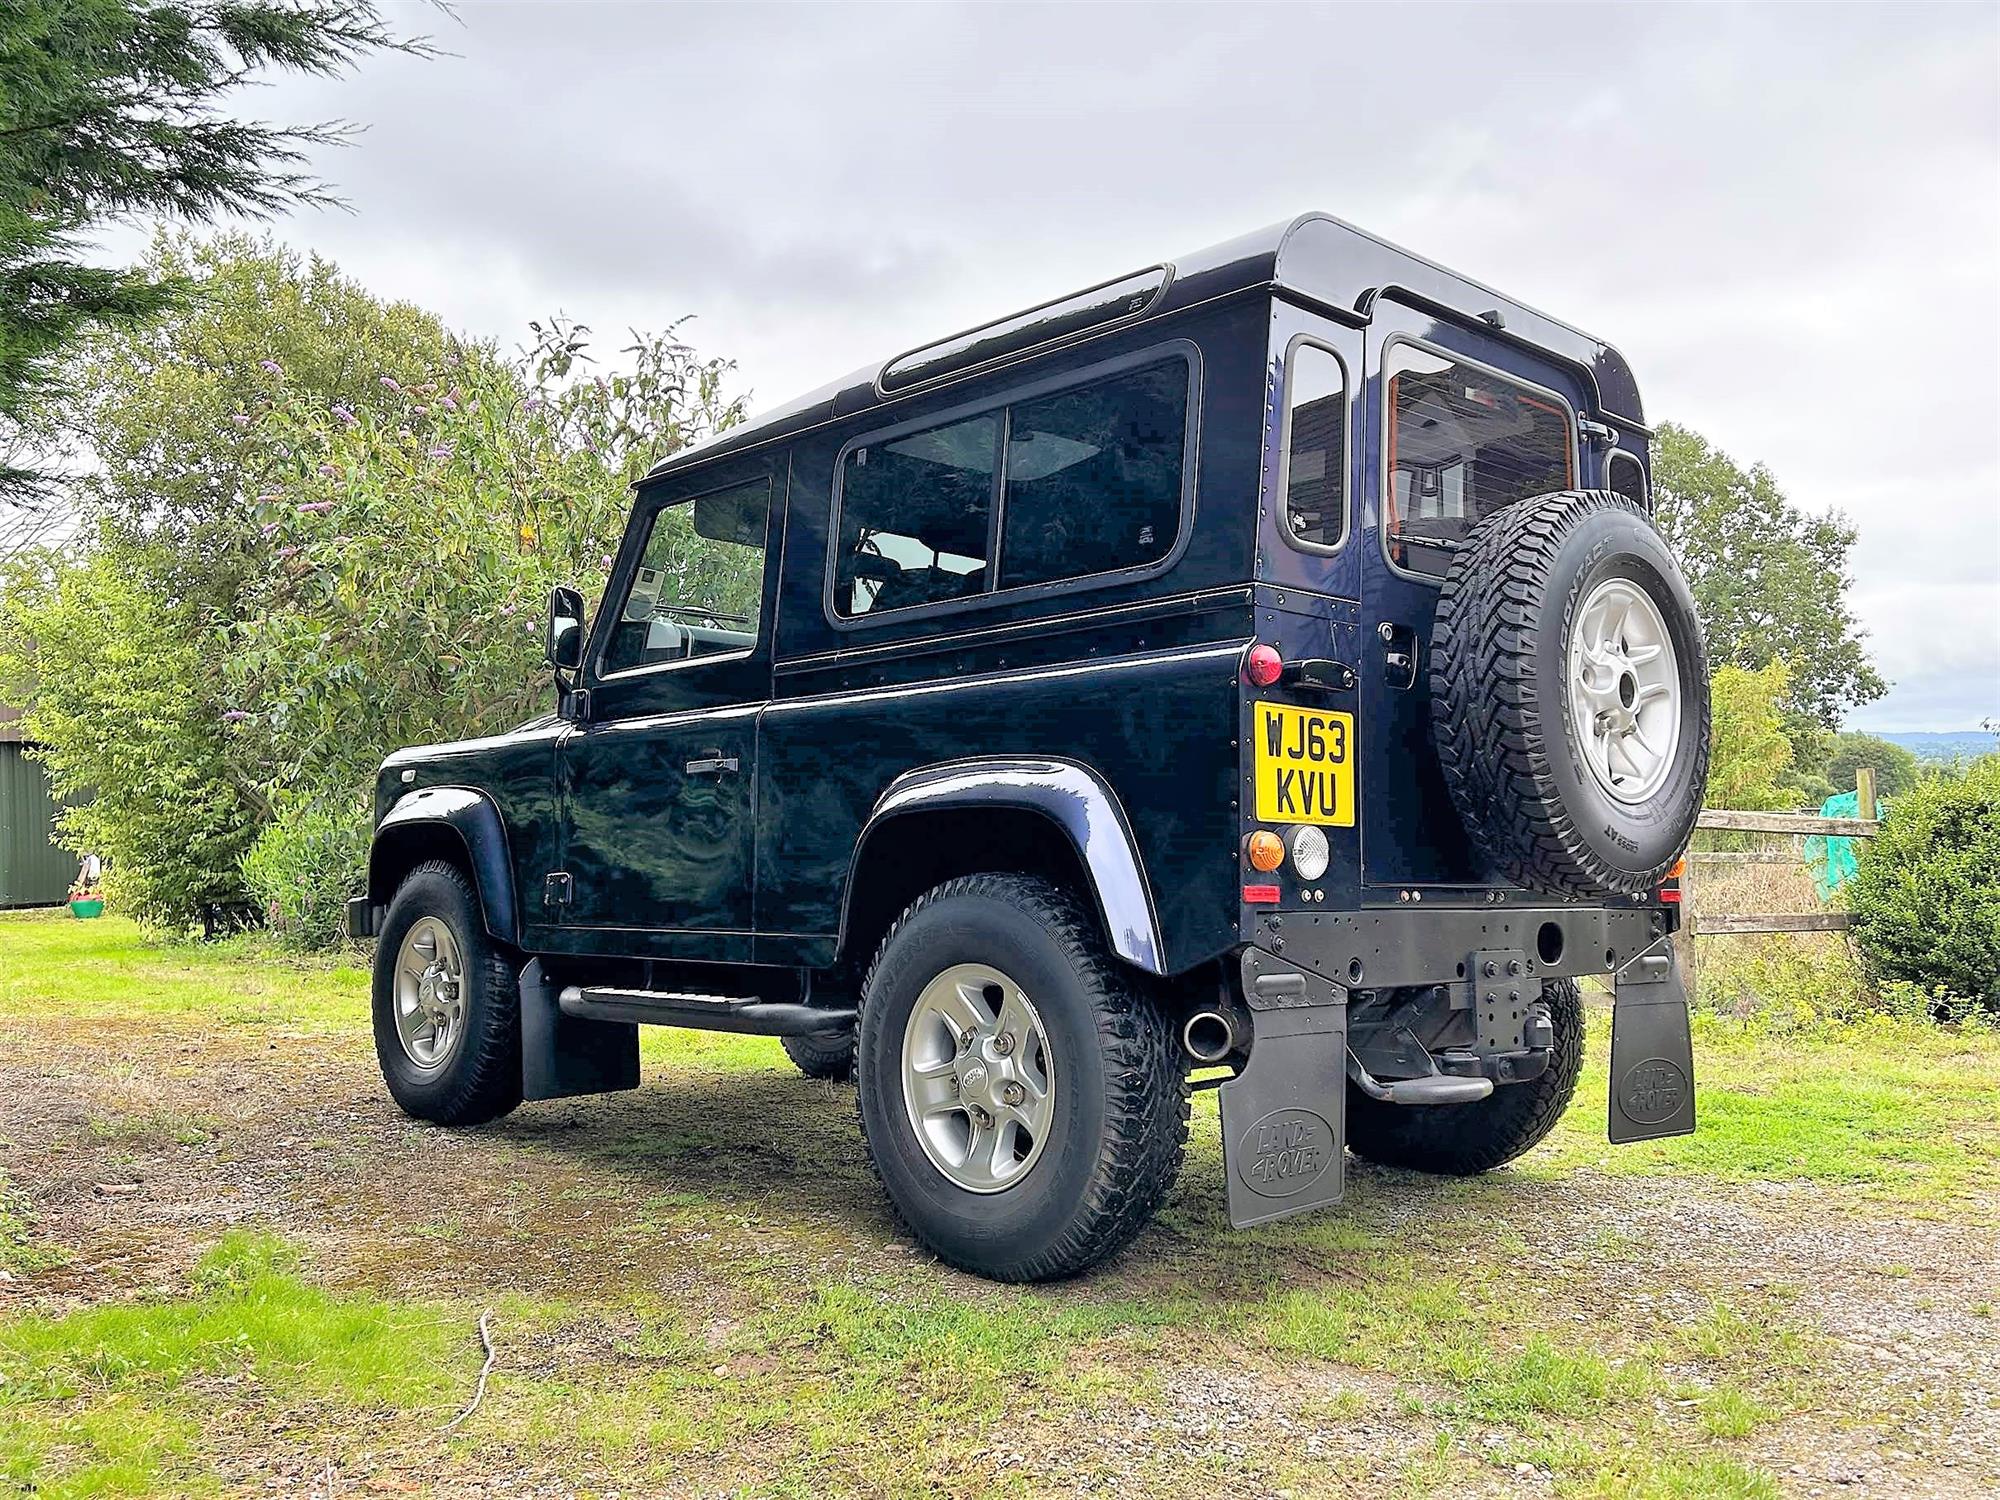 2013 Land Rover Defender 90 2.2TDCi XS Station Wagon - Image 4 of 10